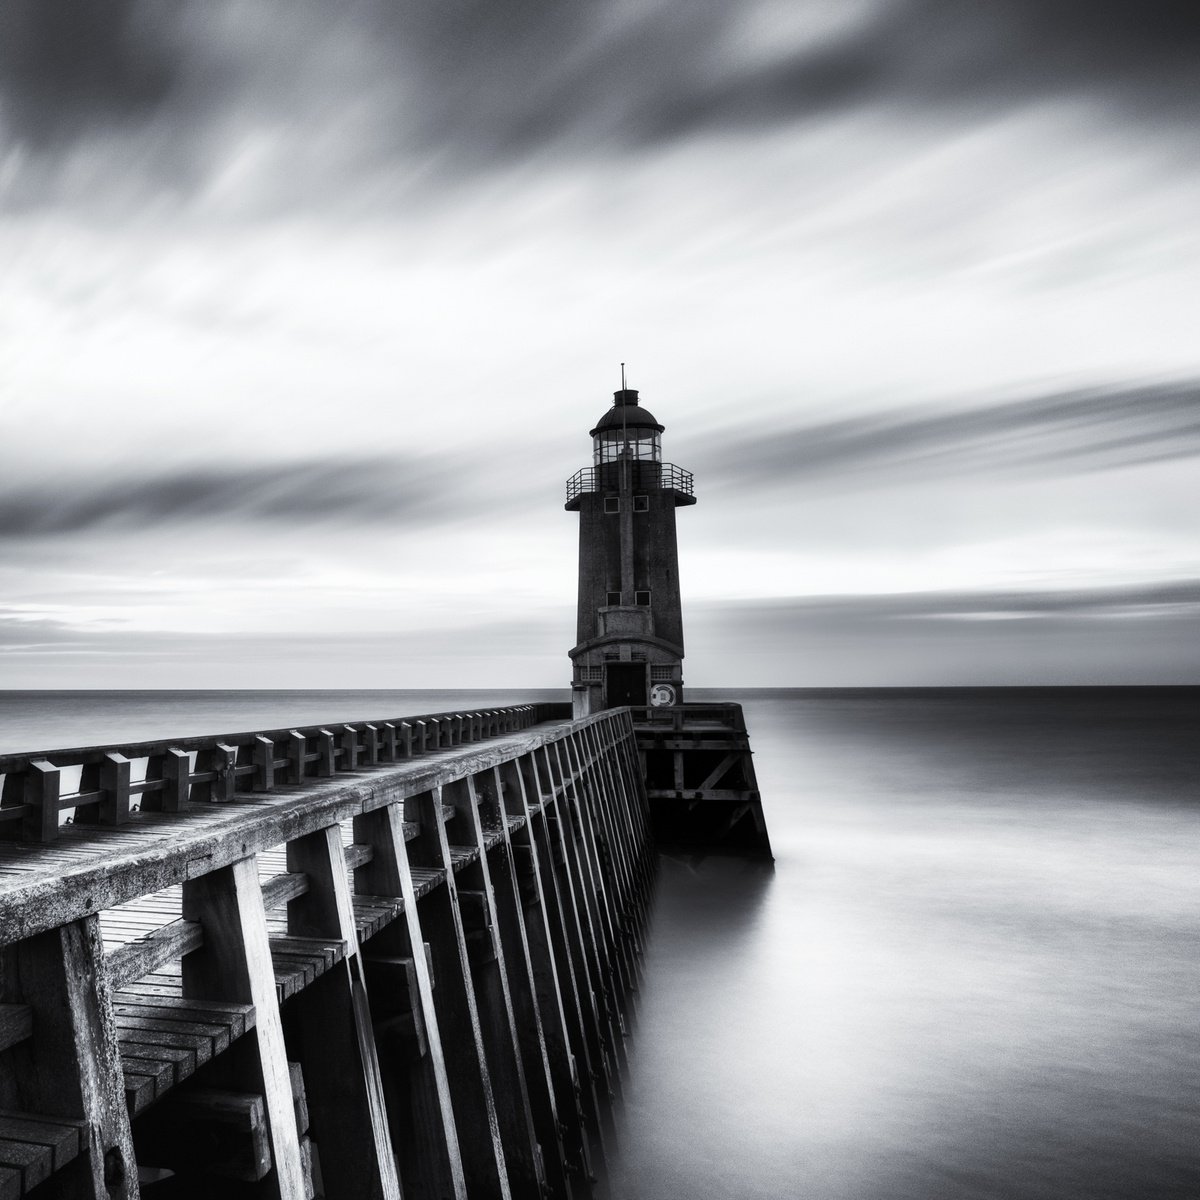 A lighthouse at the port by Karim Carella